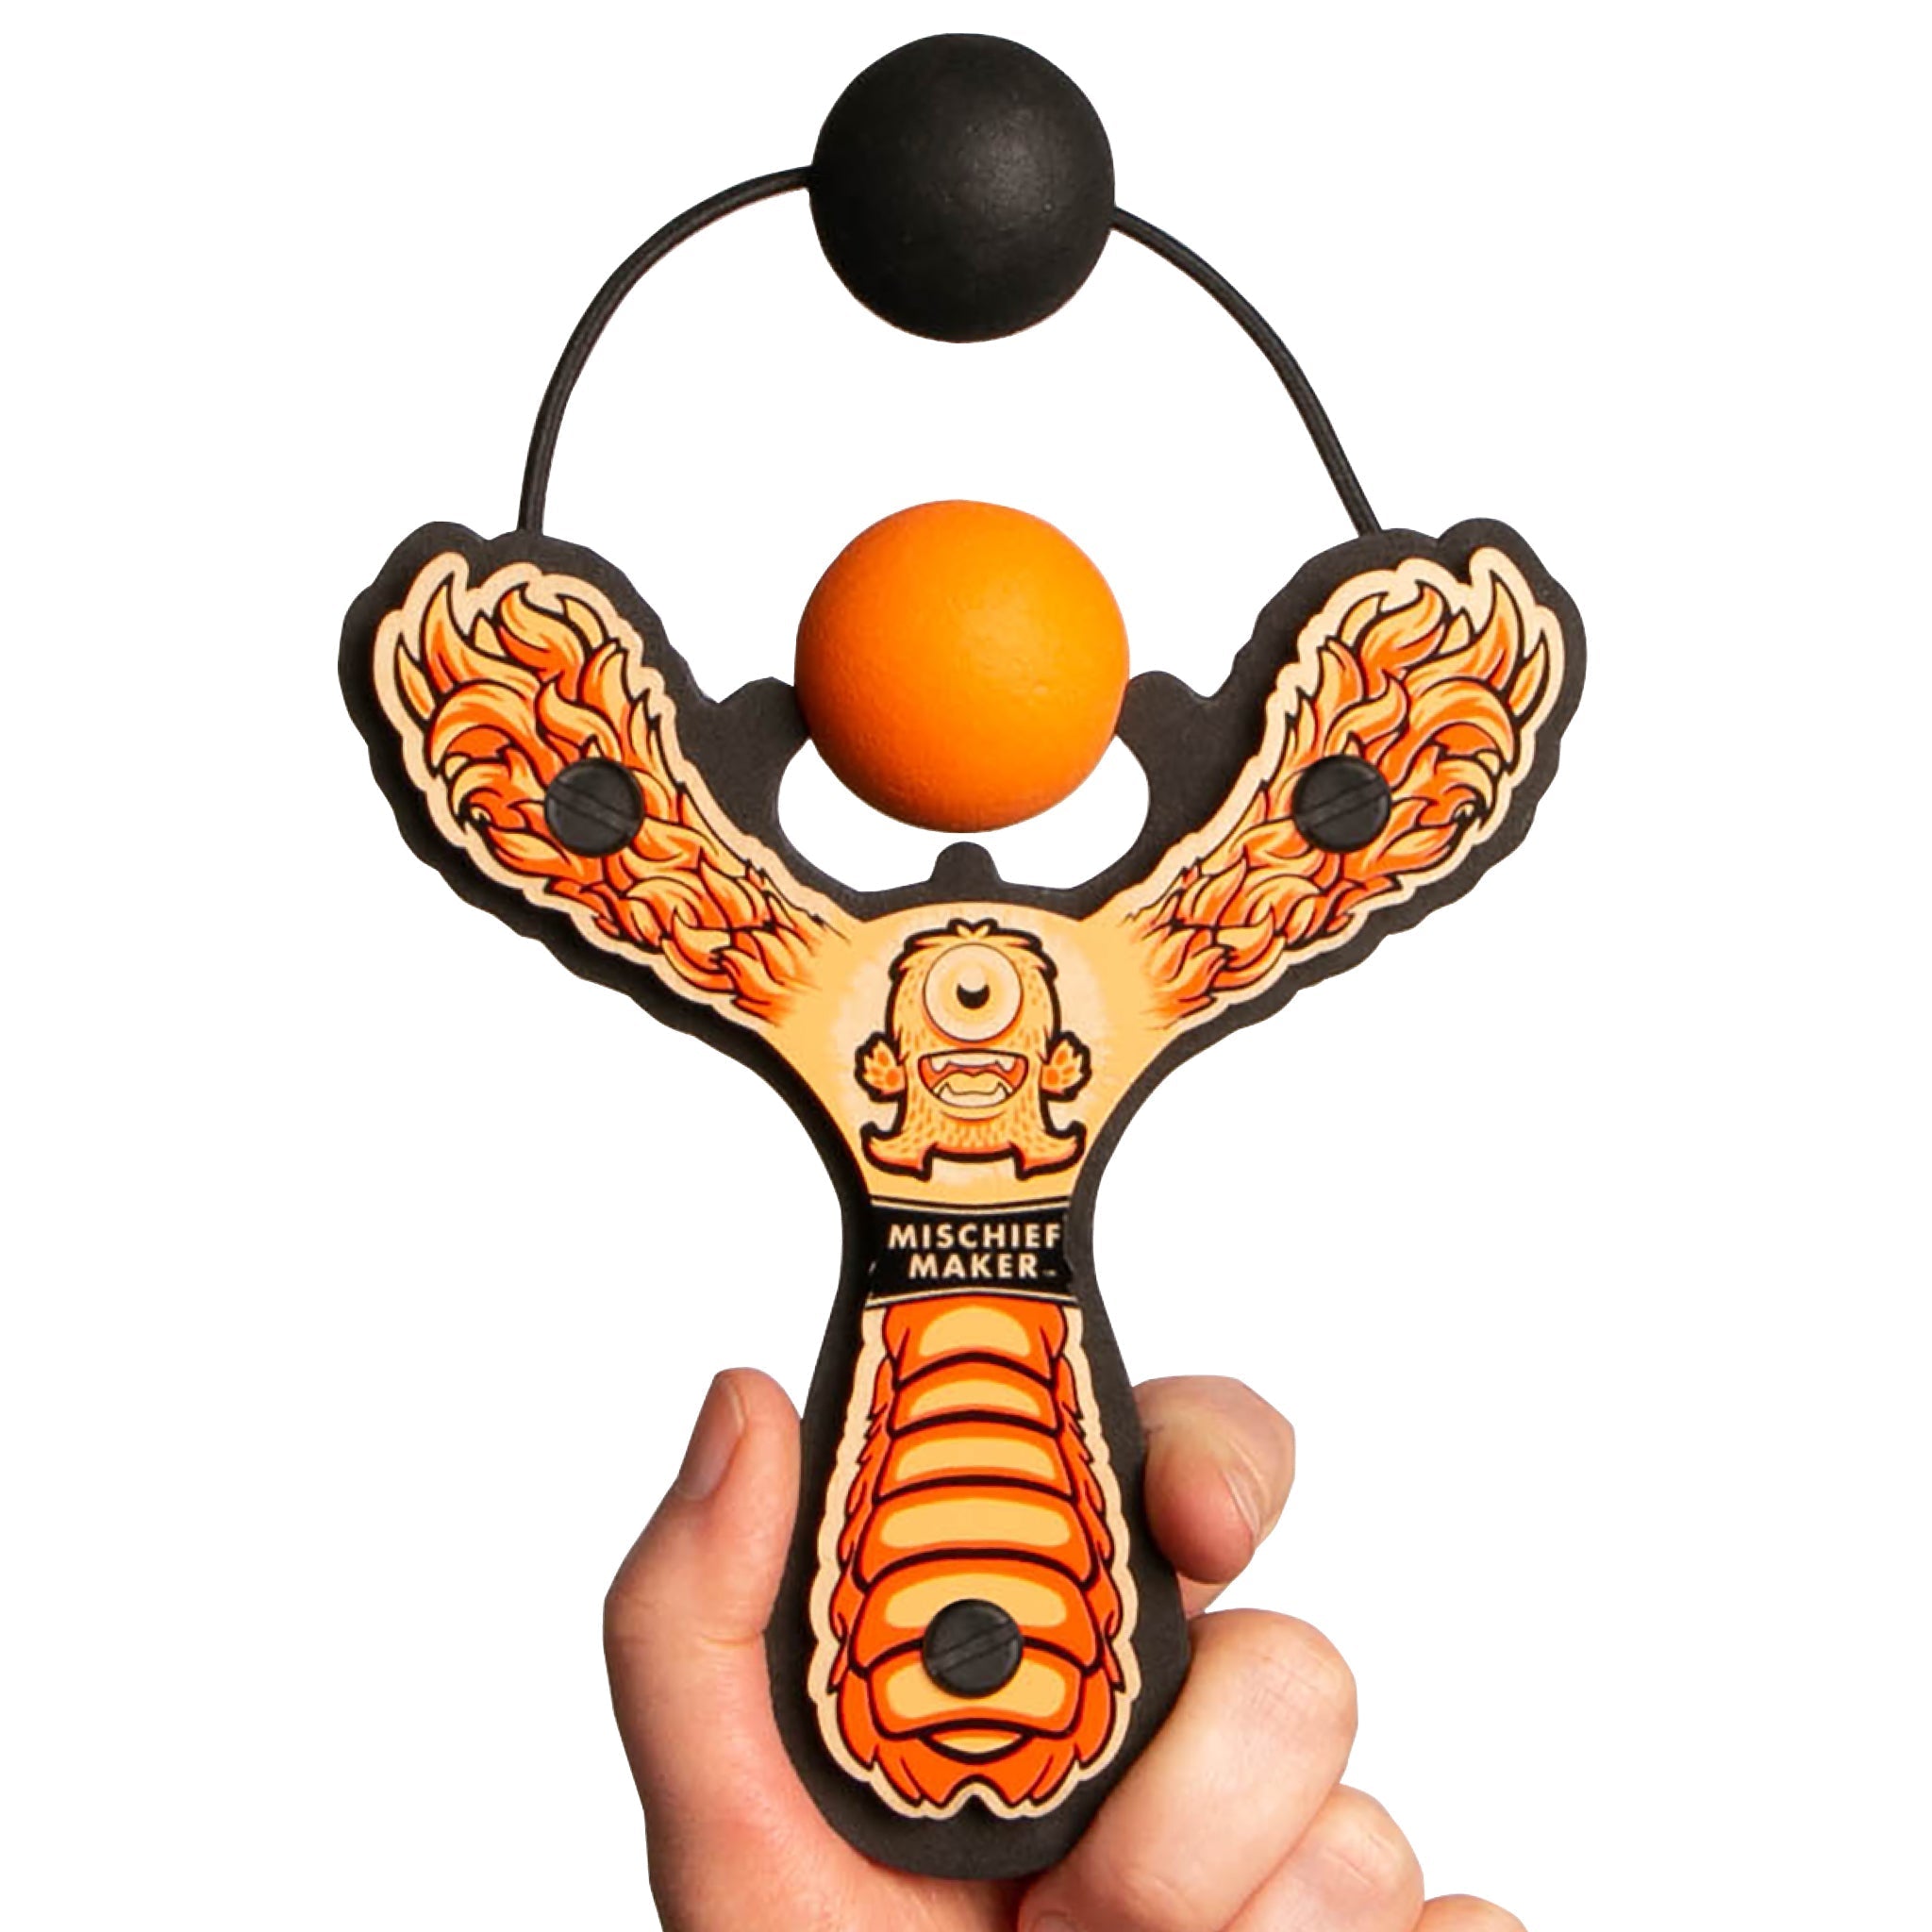 Orange Monster toy slingshot hand held with ball foam ball. Mischief Maker by Mighty Fun!